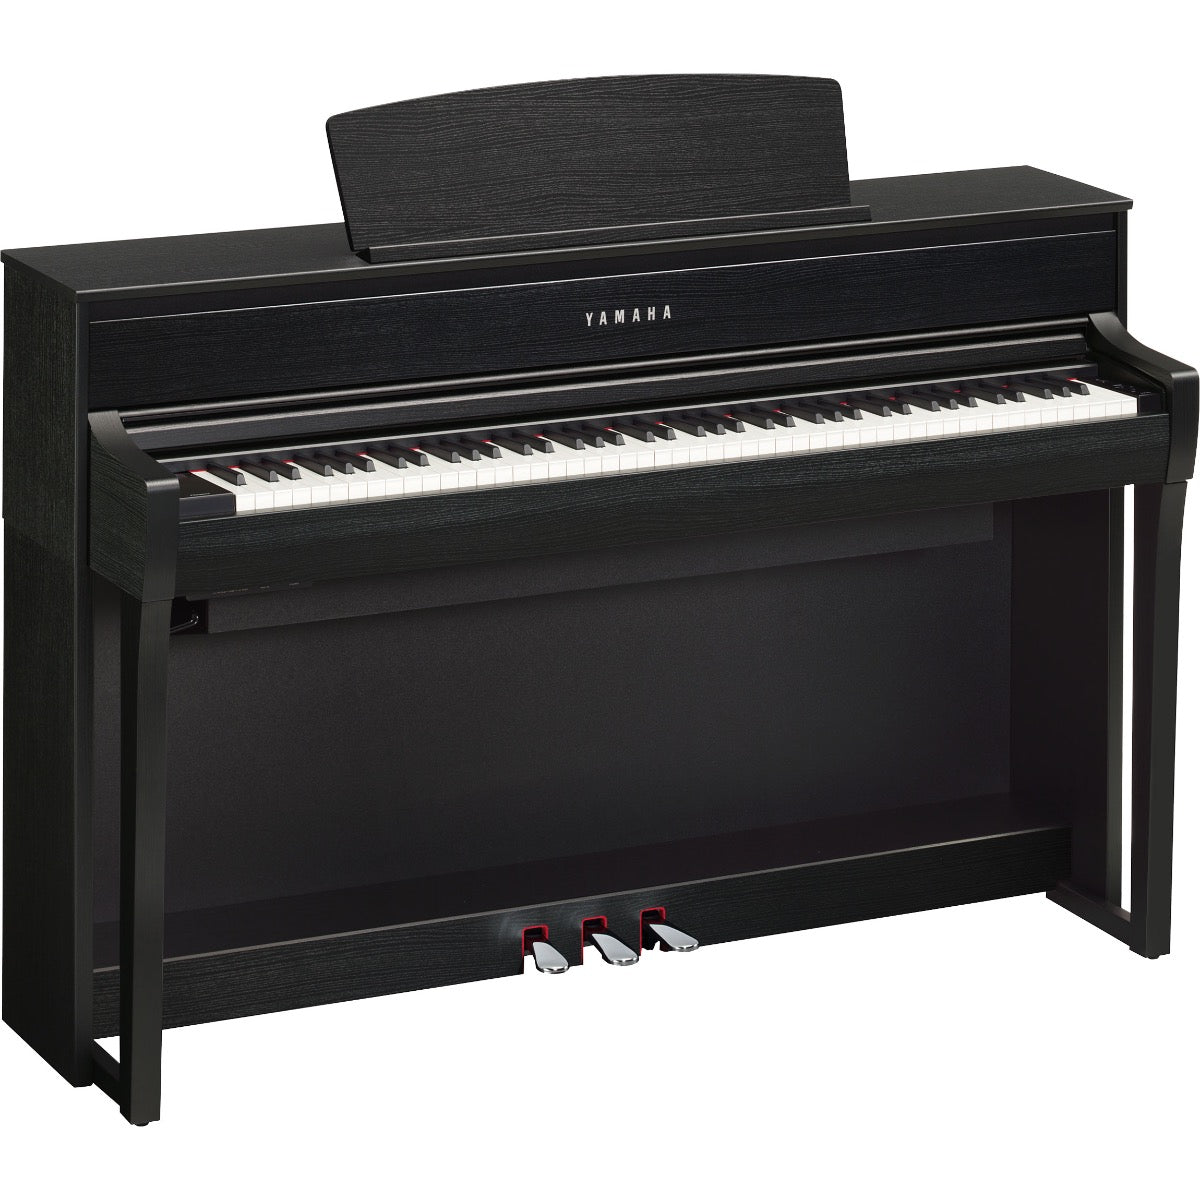 3/4 view of Yamaha Clavinova CLP-775 Digital Piano - Matte Black showing front, top and left side